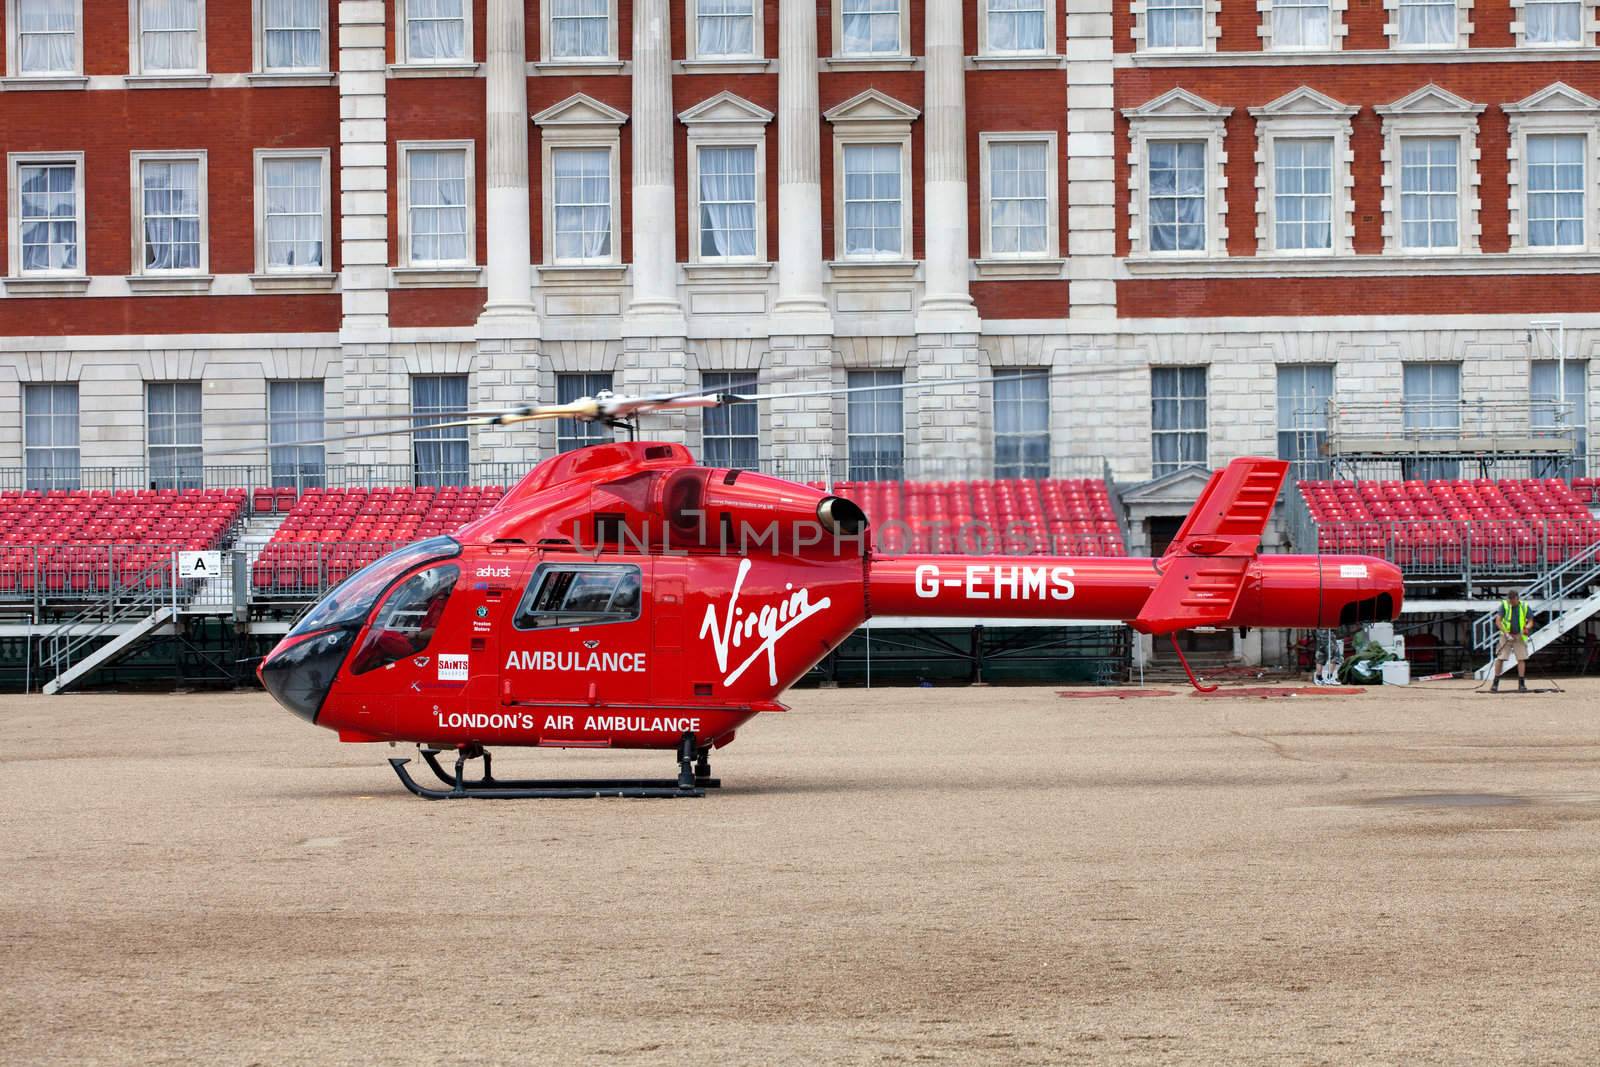 LONDON - JUNE 11: London's Air Ambulance McDonnell Douglas MD 902 Explorer Helicopter landed in Horse Guards Parade London, England on June 11, 2011. London HEMS (Helicopter Emergency Medical Service) is an air ambulance service that responds to seriously ill or injured casualties in and around London